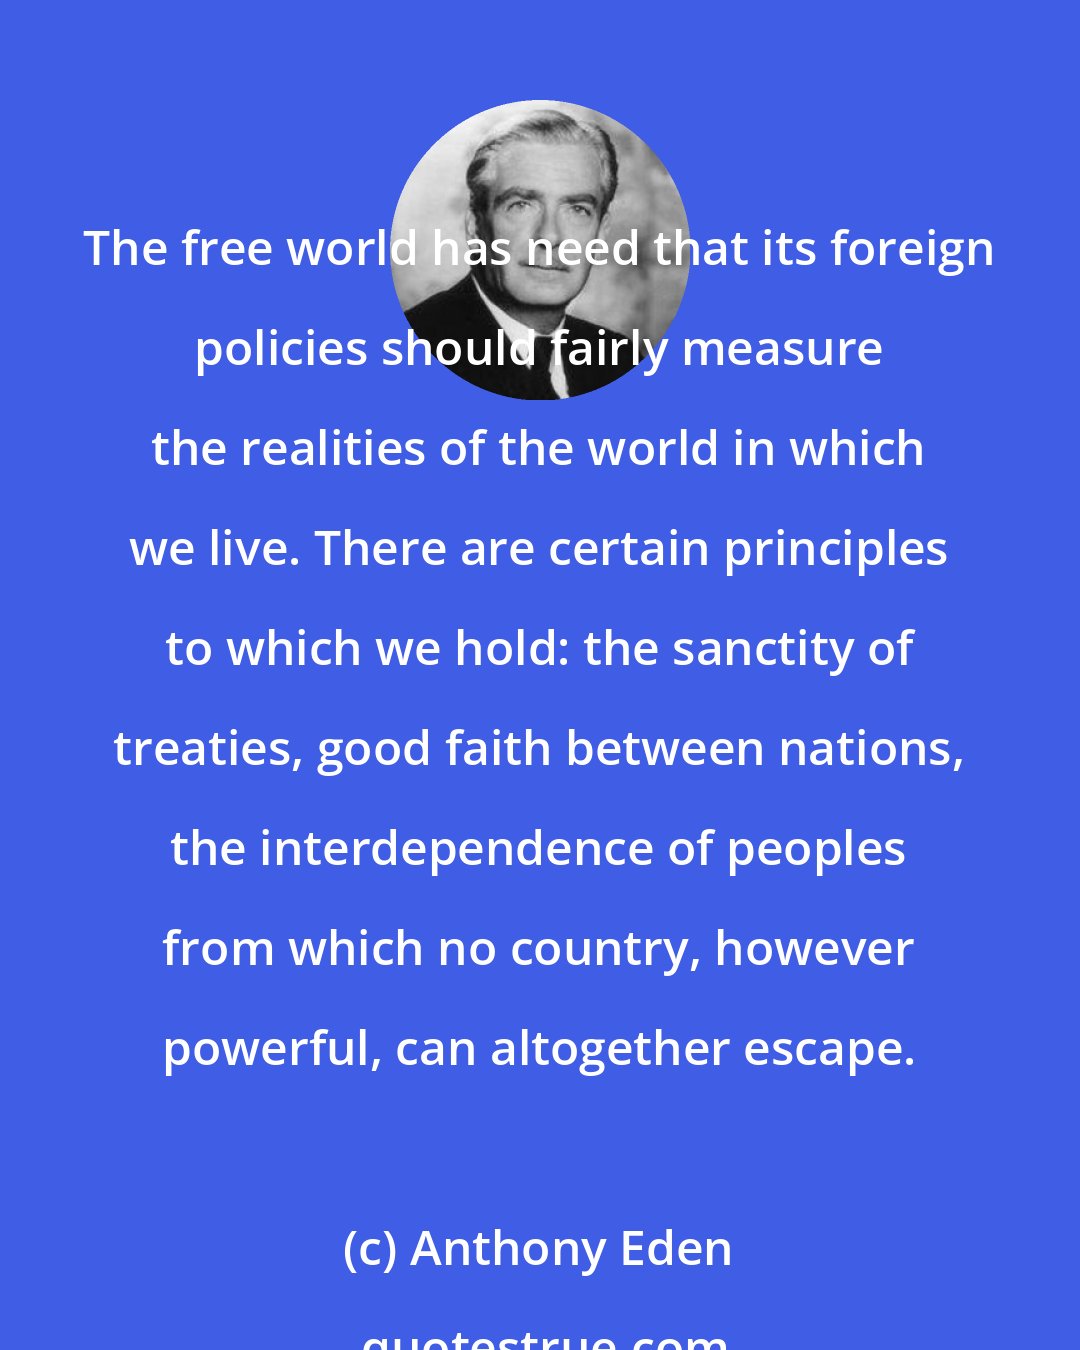 Anthony Eden: The free world has need that its foreign policies should fairly measure the realities of the world in which we live. There are certain principles to which we hold: the sanctity of treaties, good faith between nations, the interdependence of peoples from which no country, however powerful, can altogether escape.